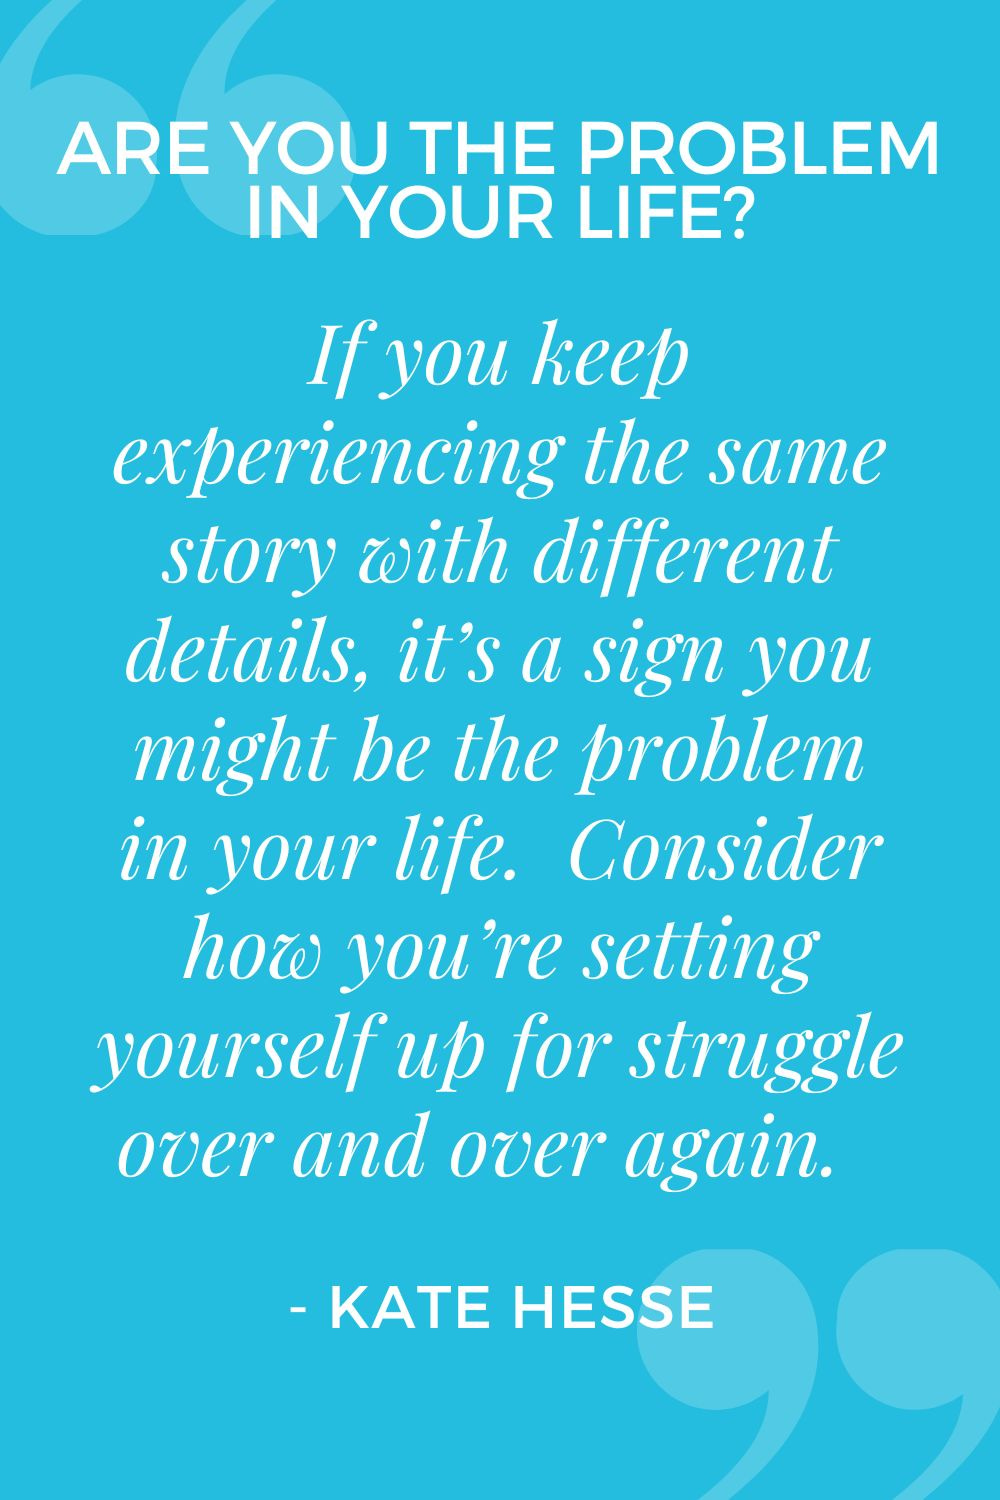 If you keep experiencing the same story with different details, it's a sign you might be the problem in your life. Consider how you're setting yourself up for struggle over and over again.